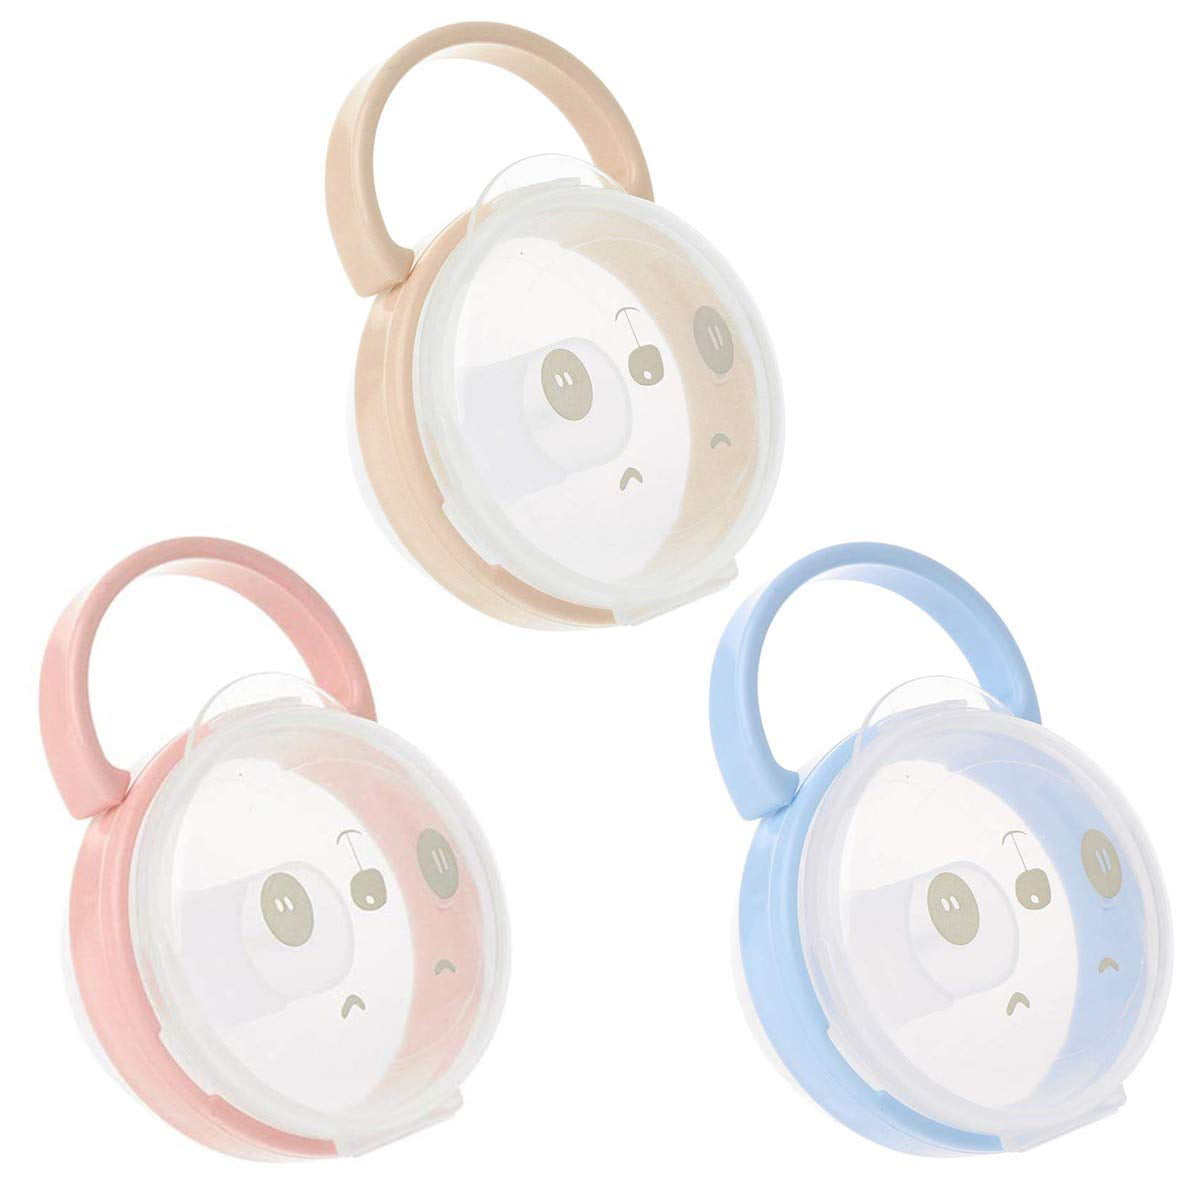 Baby Infant Soother Holder Storage Case Pacifier Dummy Travel Box 